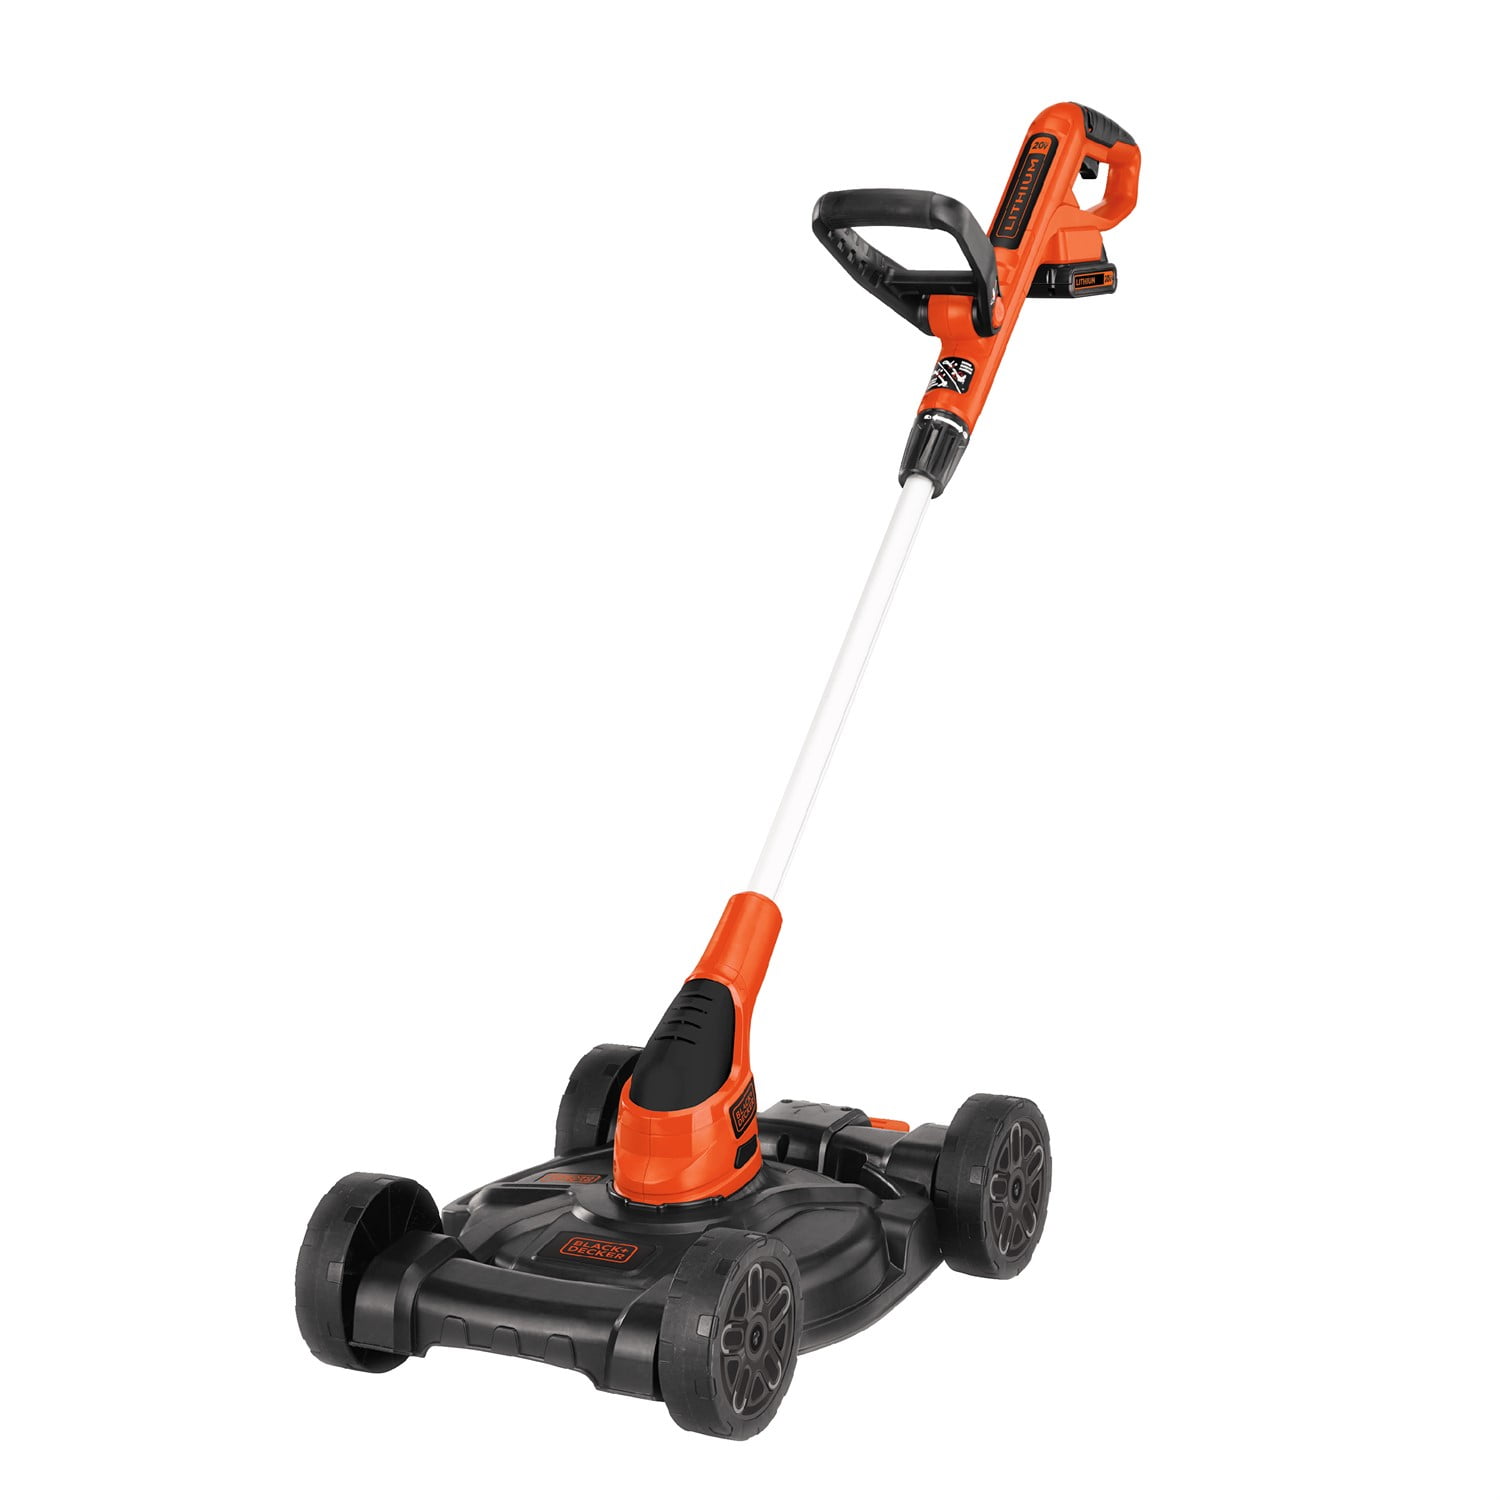 Black & Decker LE750 11 Amp 2-in-1 Landscape Edger and Trencher